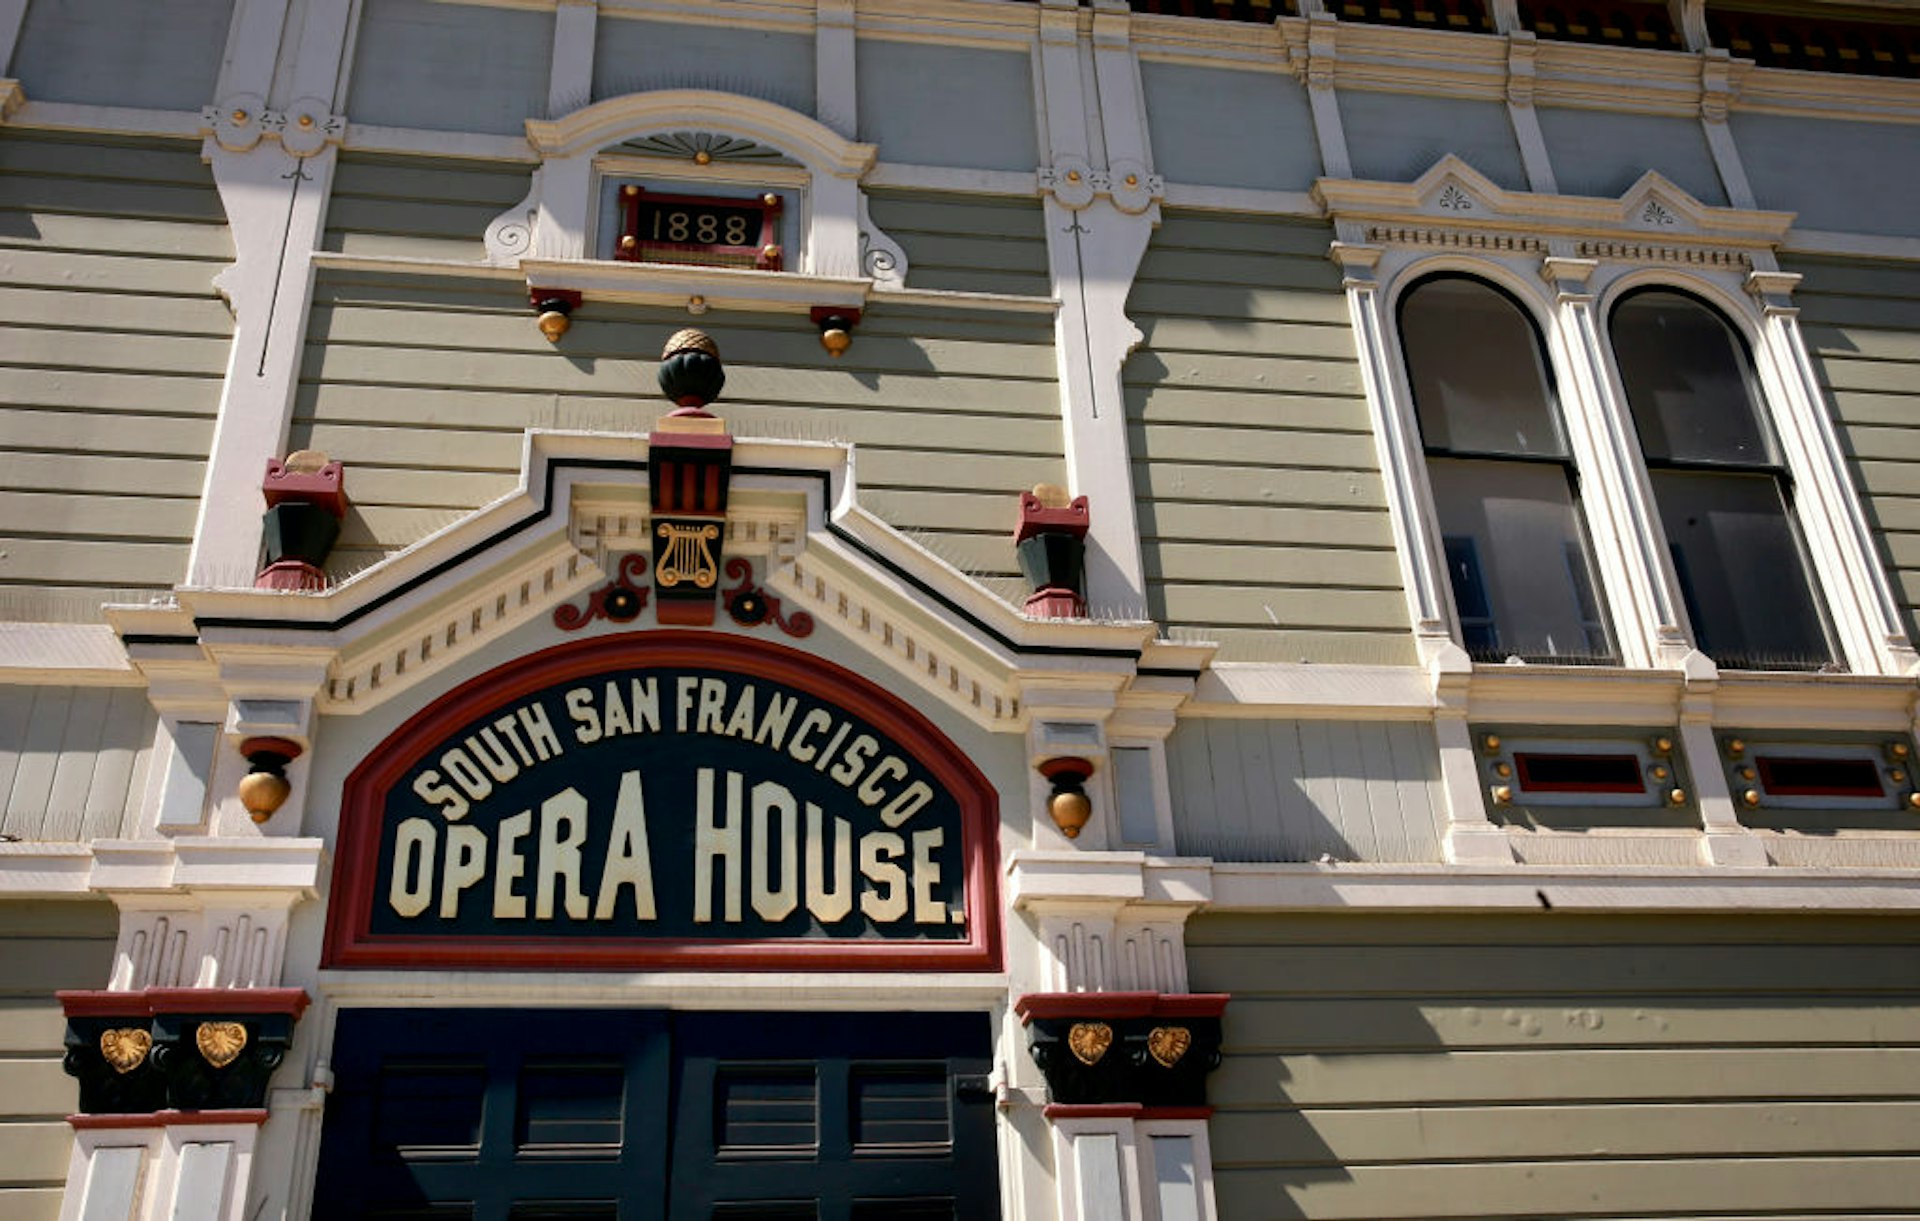 The restored facade of the Bayview Opera House in San Francisco, California